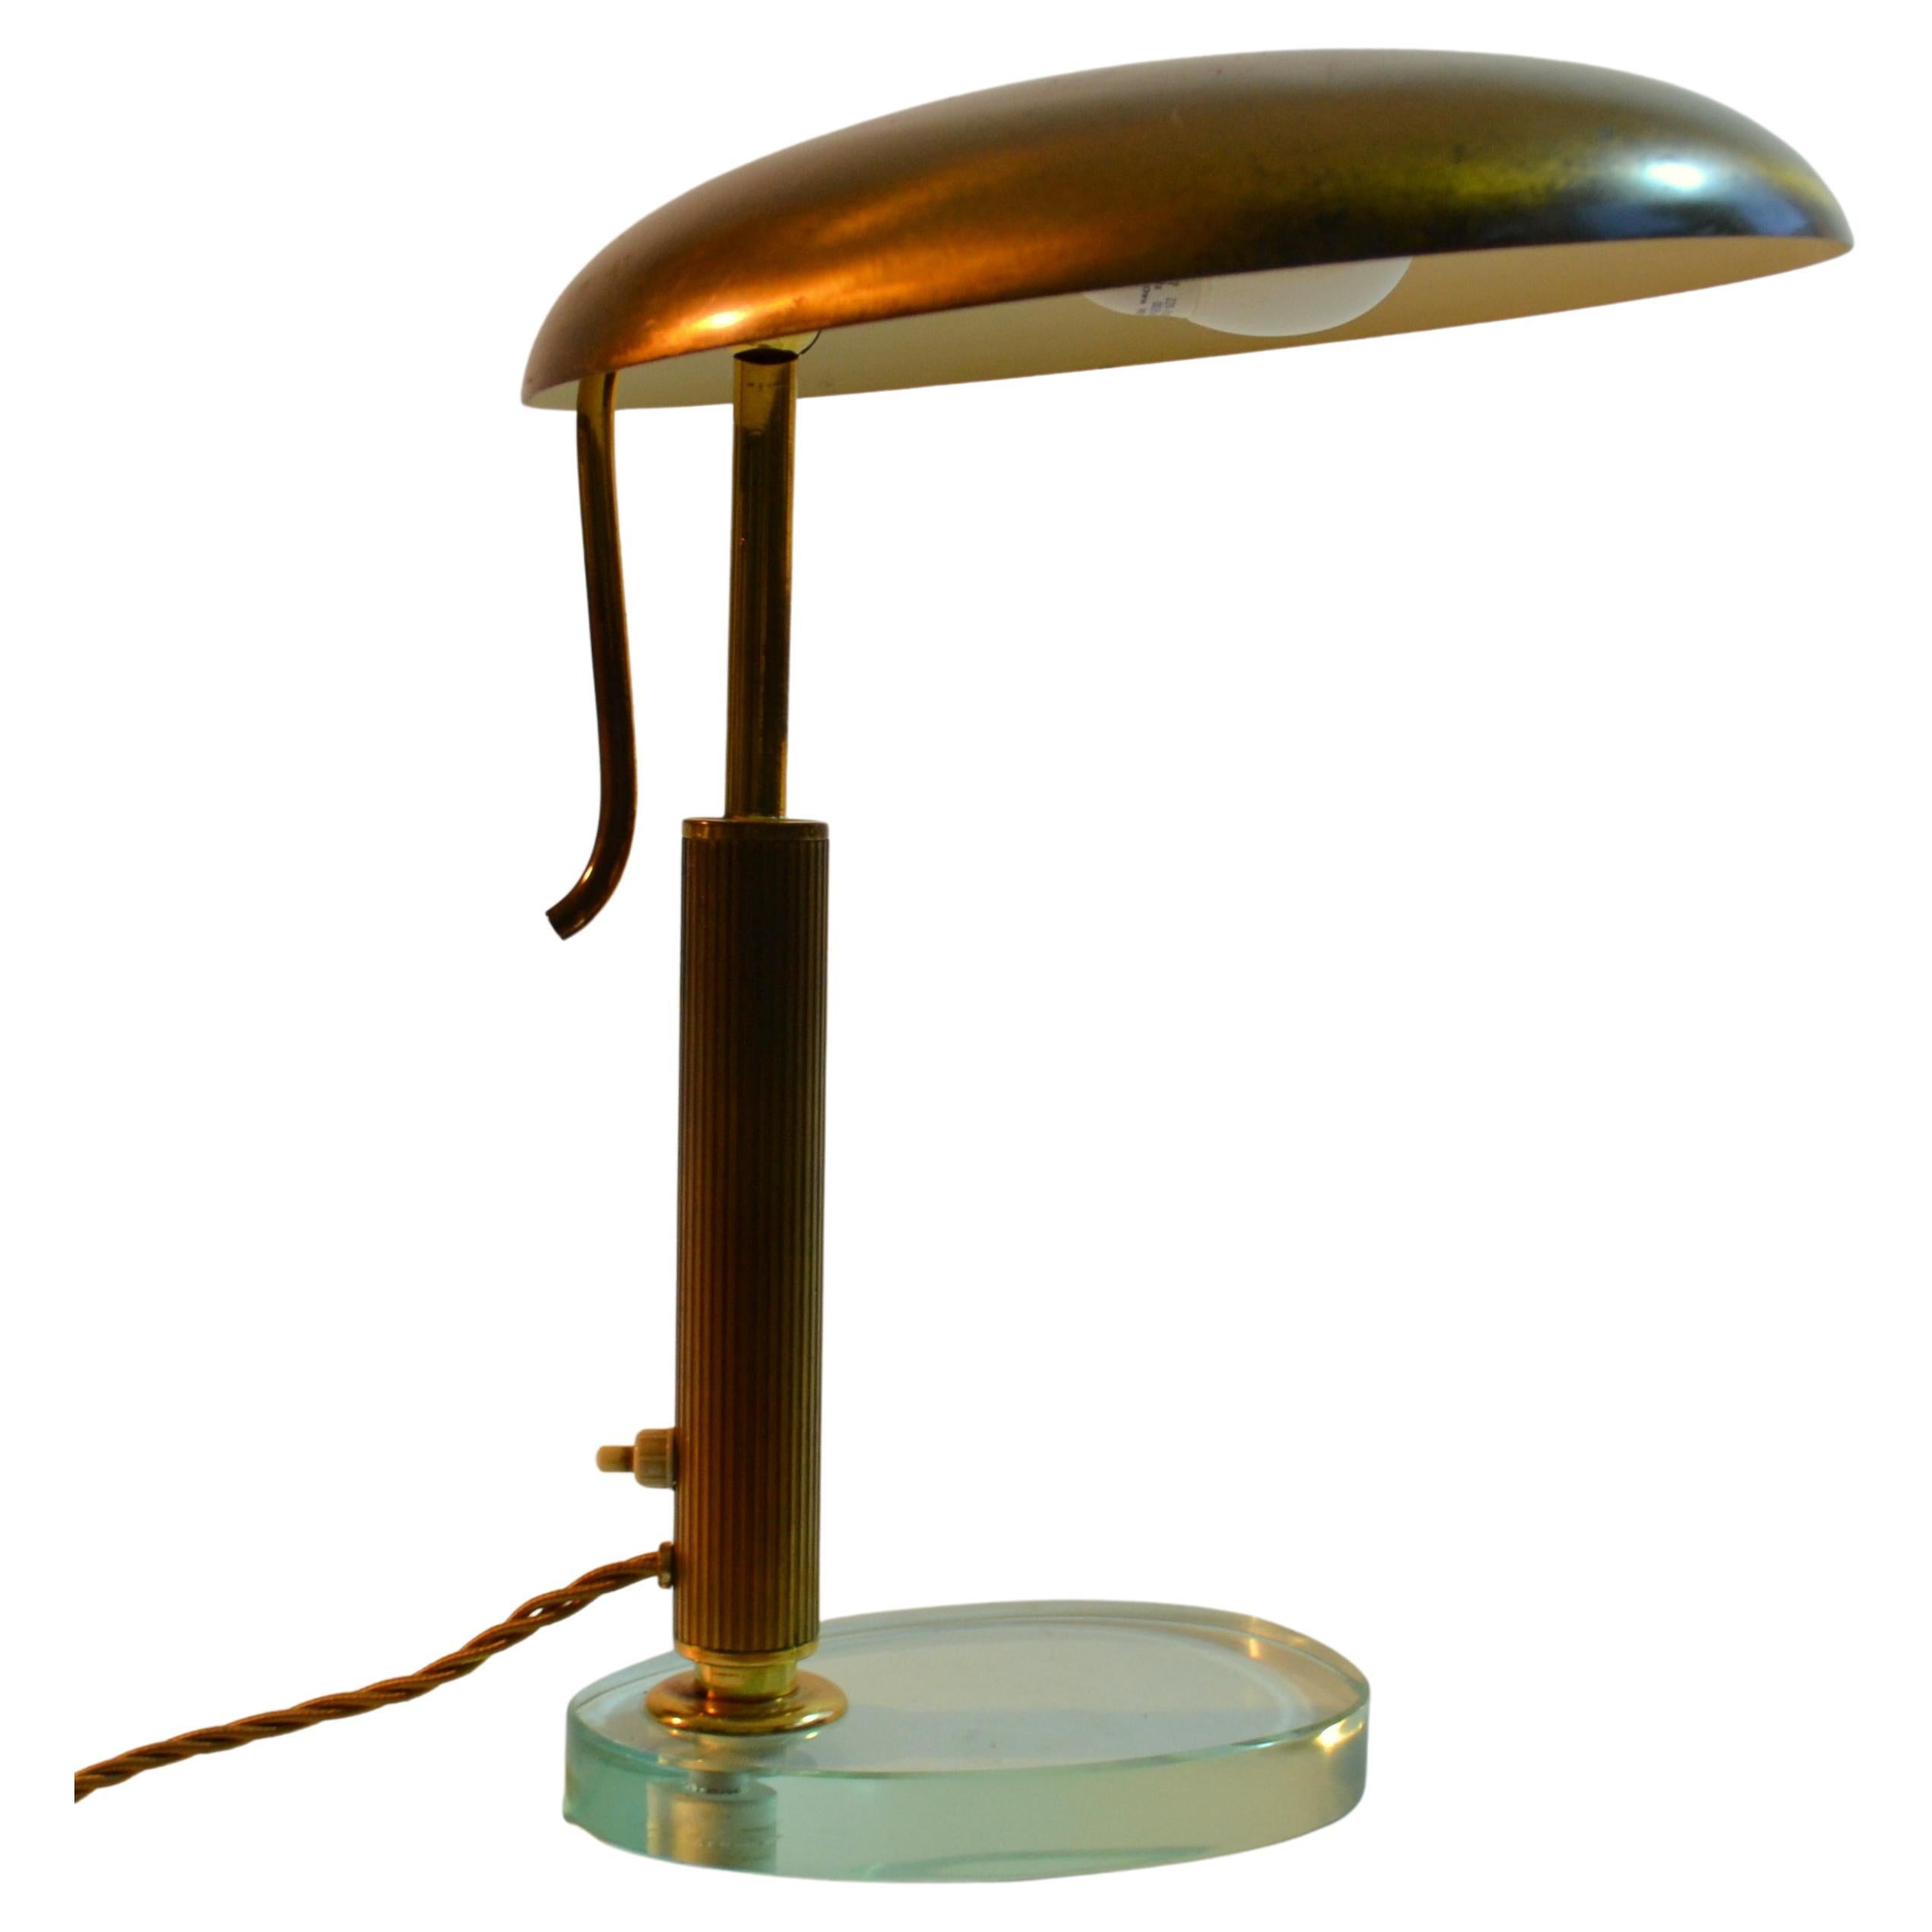 Elegant Italian Modernist 1940's desk or table lamp with adjustable brass shade sits on a glass oval base.
Modernist Desk Lamp attributed to Pietro Chiesa for Fontana Arte  Italy circa 1940.